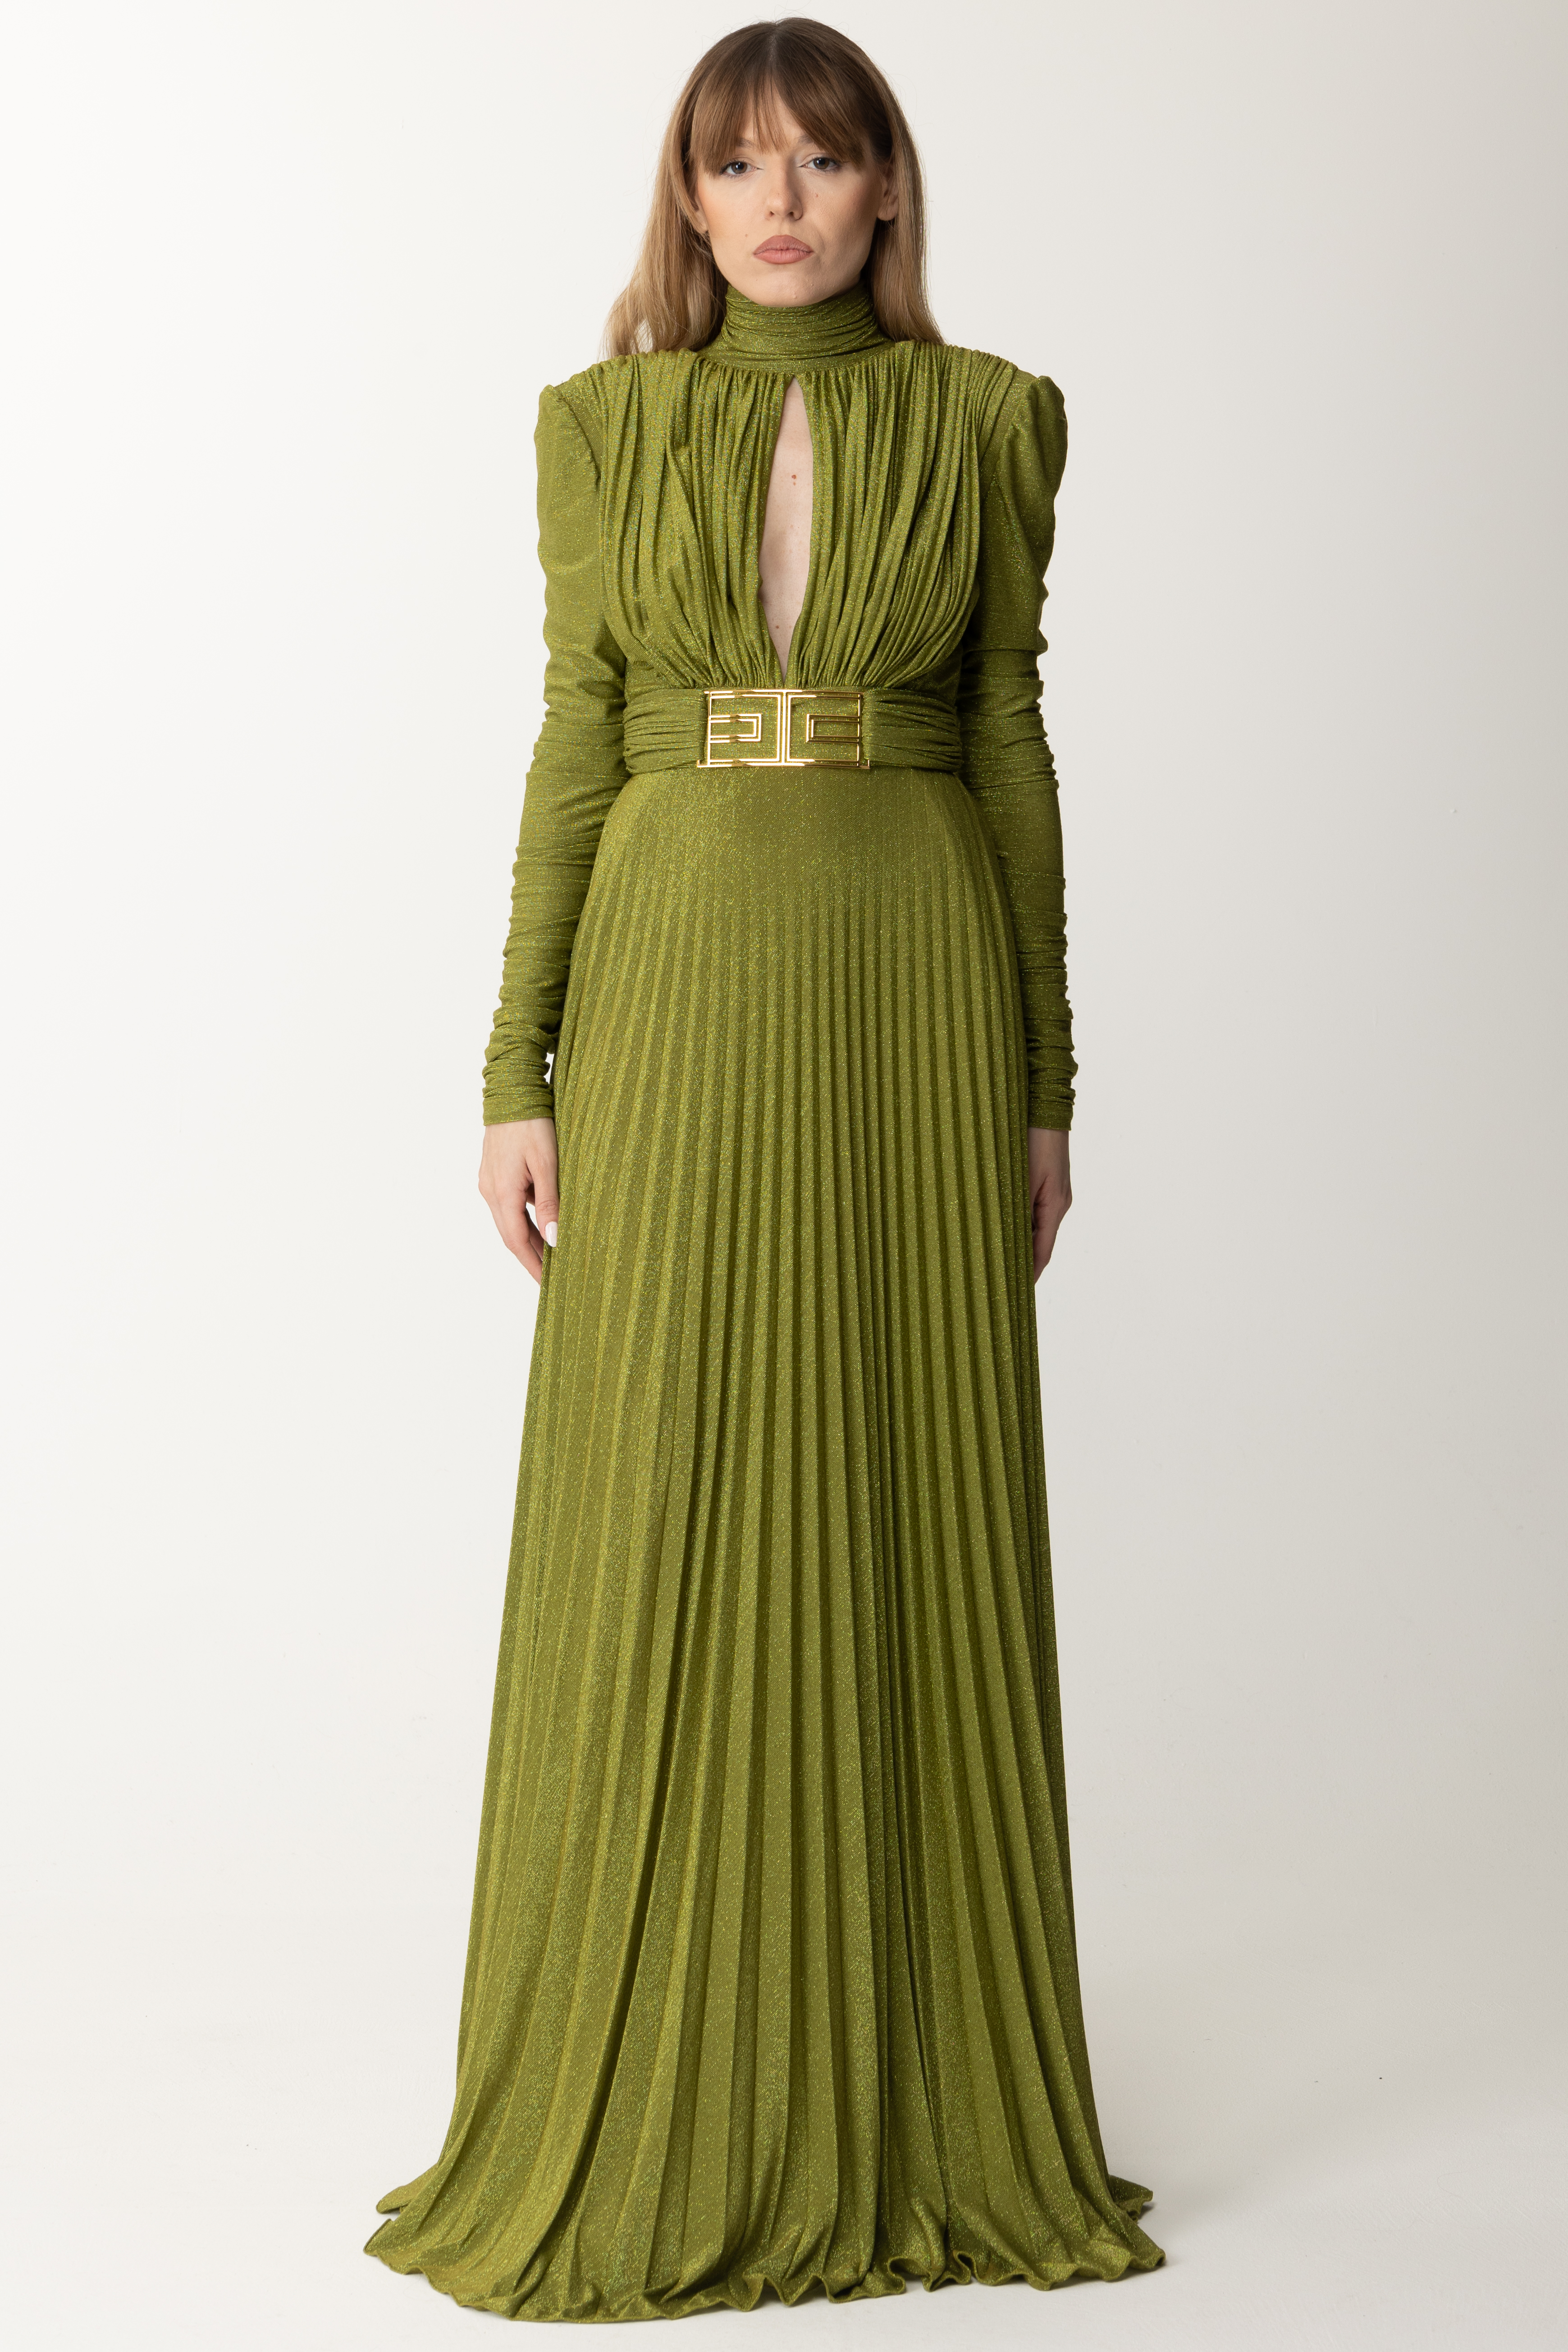 Preview: Elisabetta Franchi Red carpet dress in pleated lurex jersey OLIVE OIL